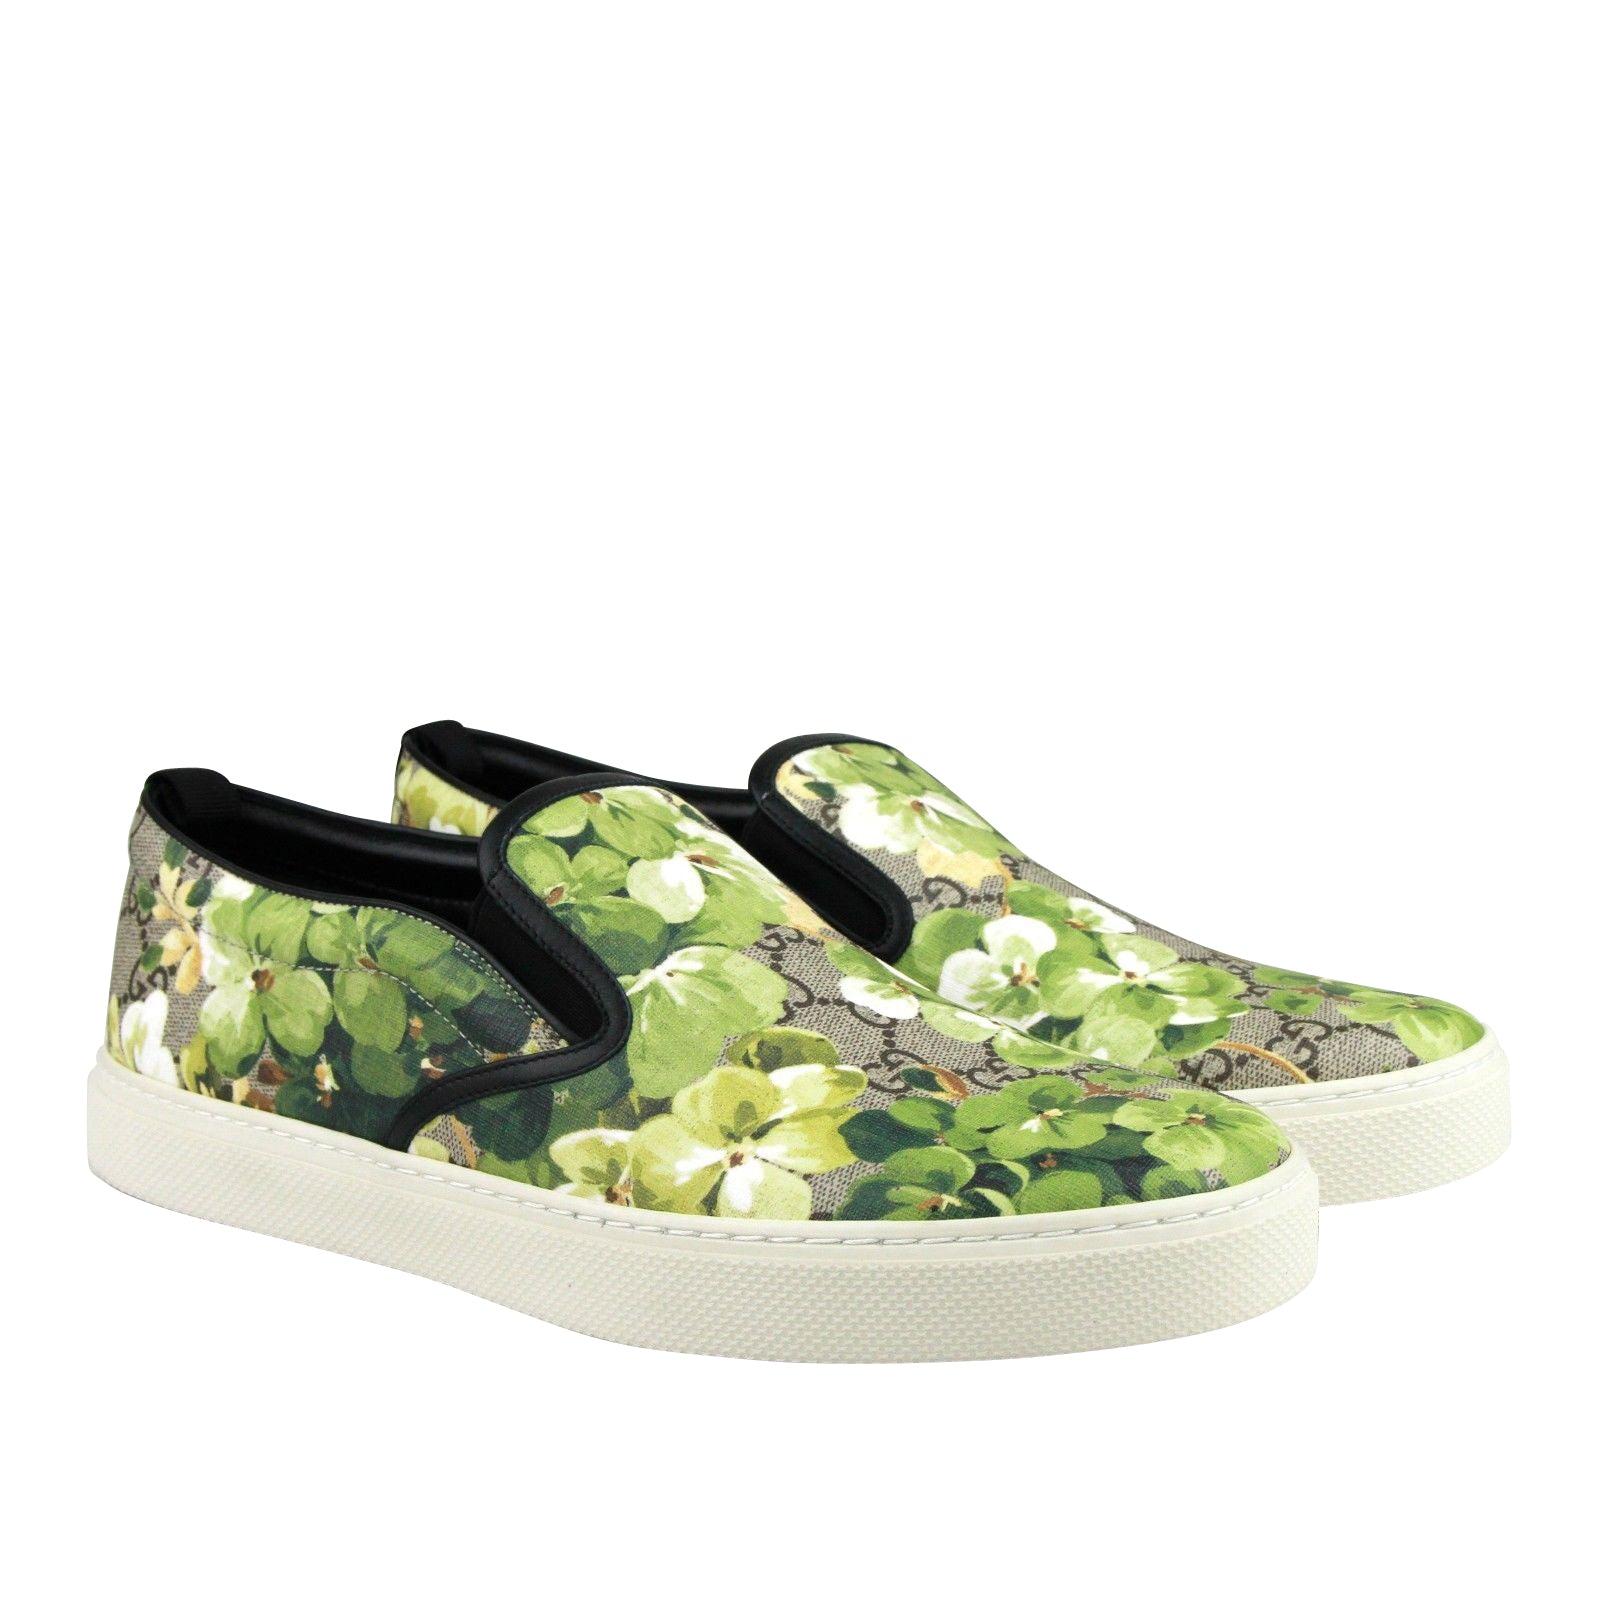 Gucci Bloom Flower Print Supreme gg Canvas Slip Sneakers 407362 8961 in  Green for Men - Save 2% | Lyst